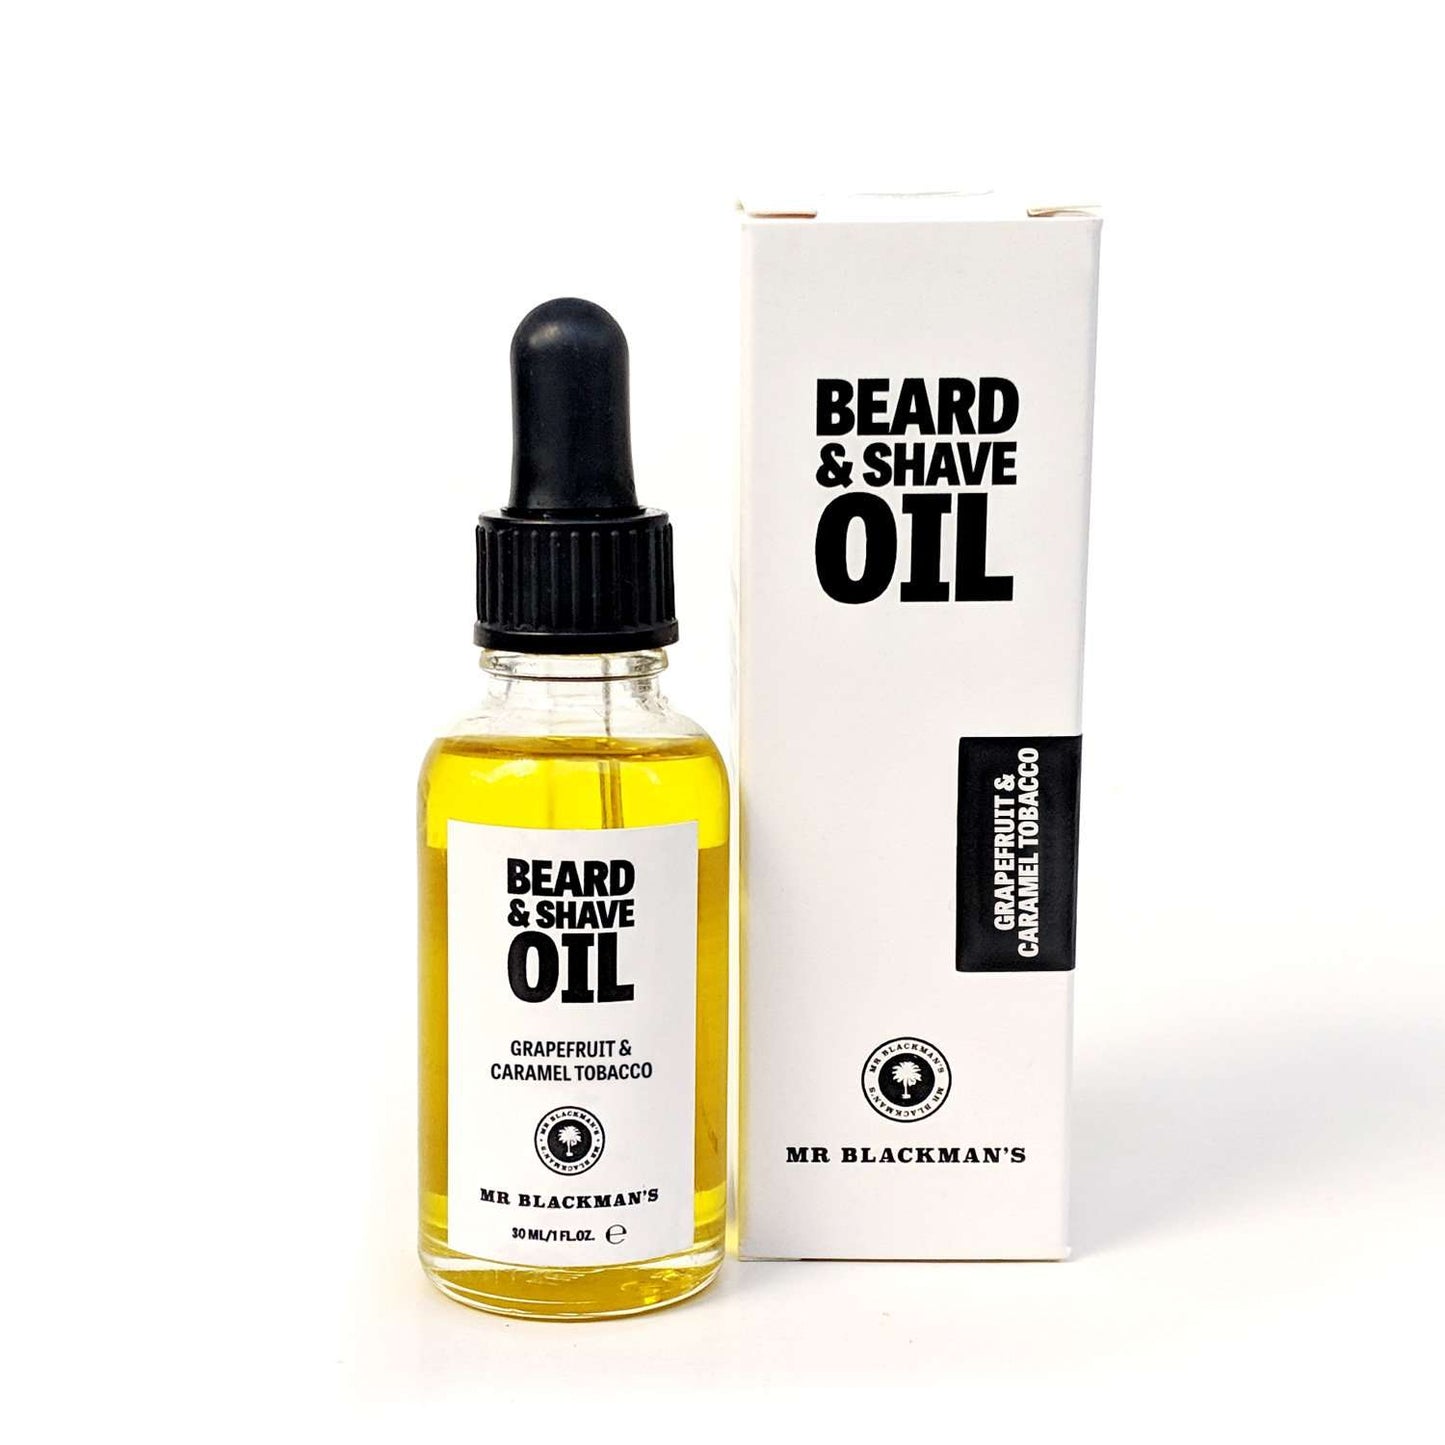 Beard and Aftershave Oil - Grapefruit & Caramel Tobacco